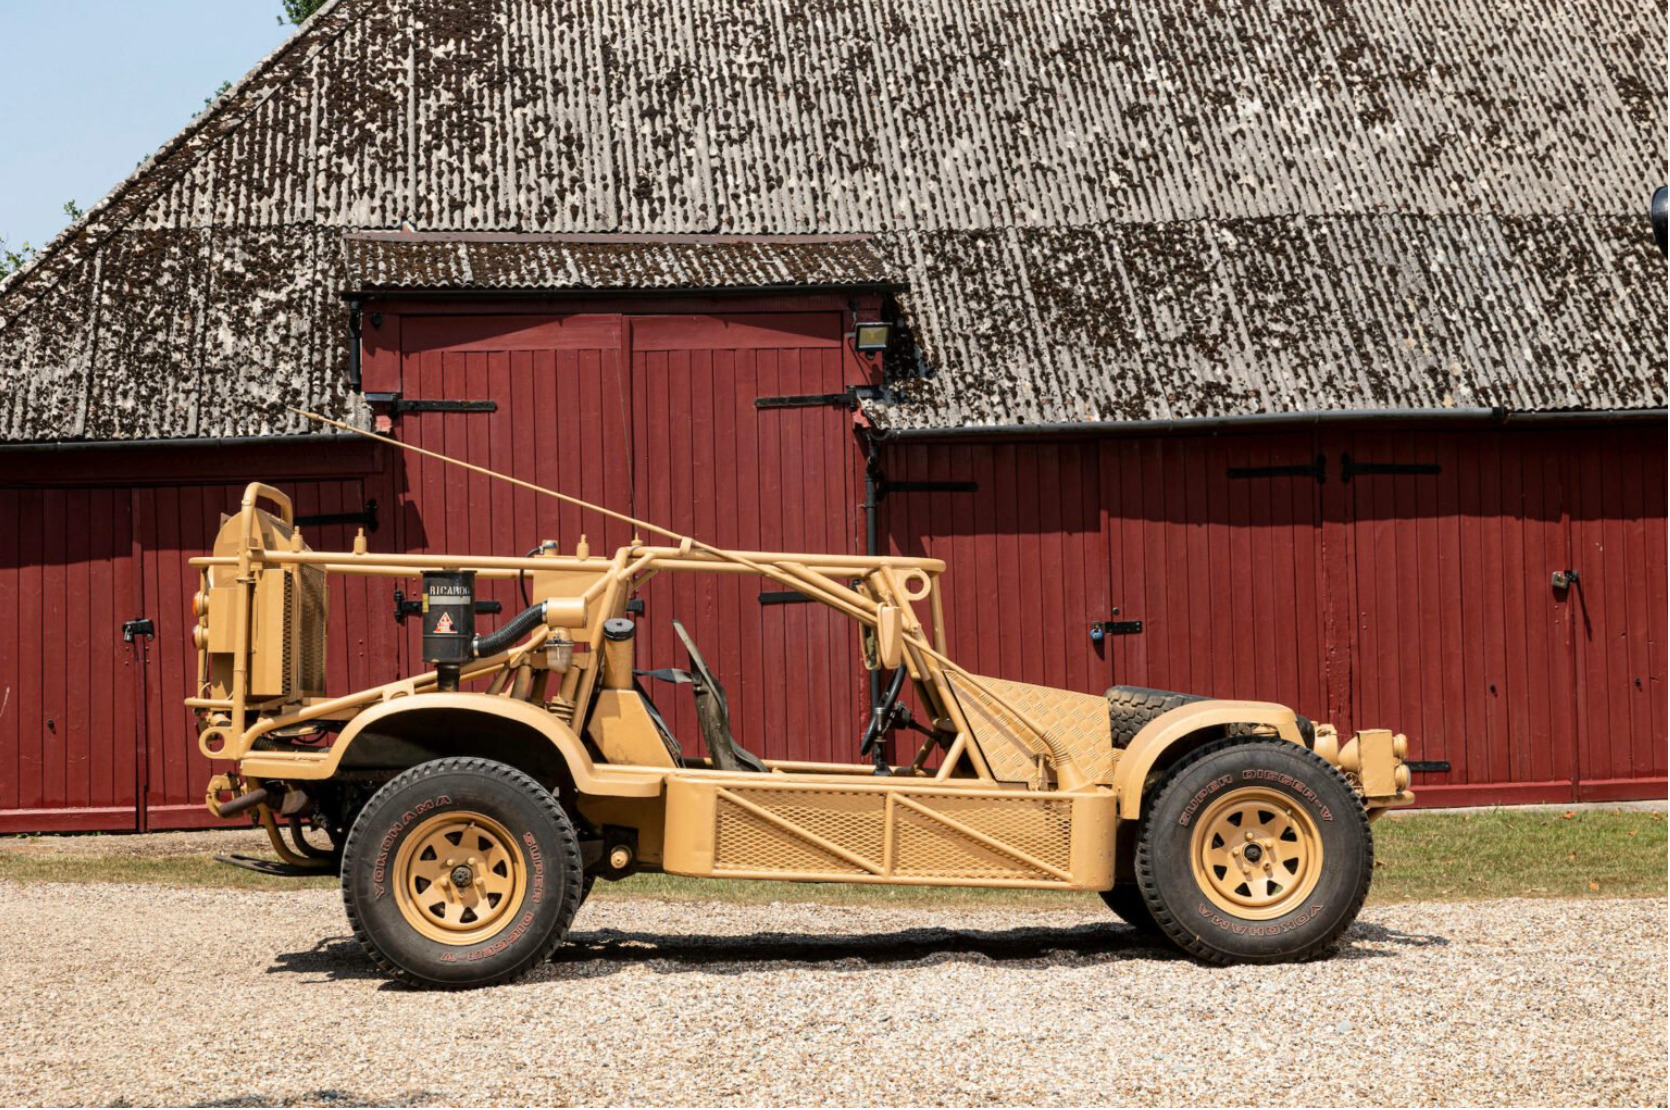 British SAS Dune Buggy parked in front of a barn in profile